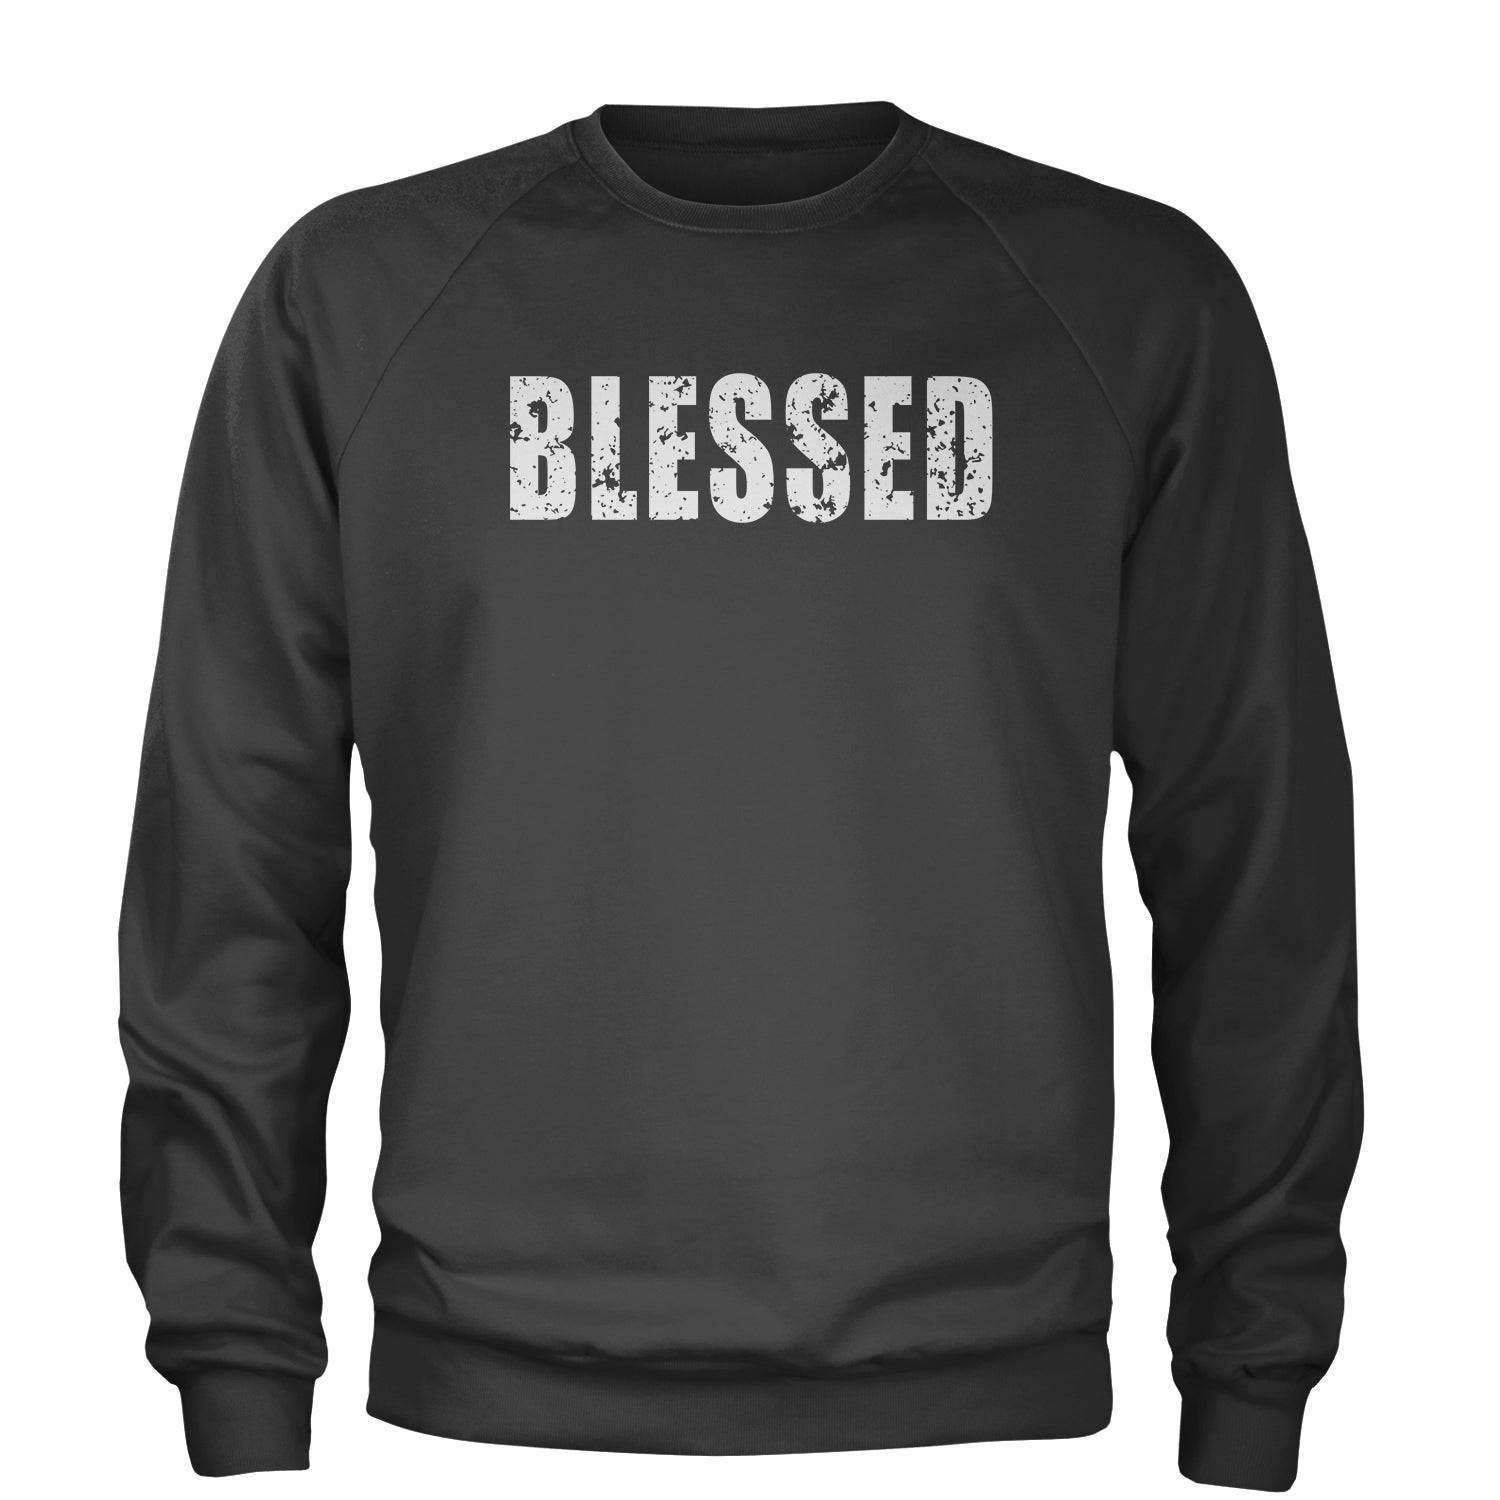 Blessed Religious Grateful Thankful Adult Crewneck Sweatshirt #expressiontees by Expression Tees